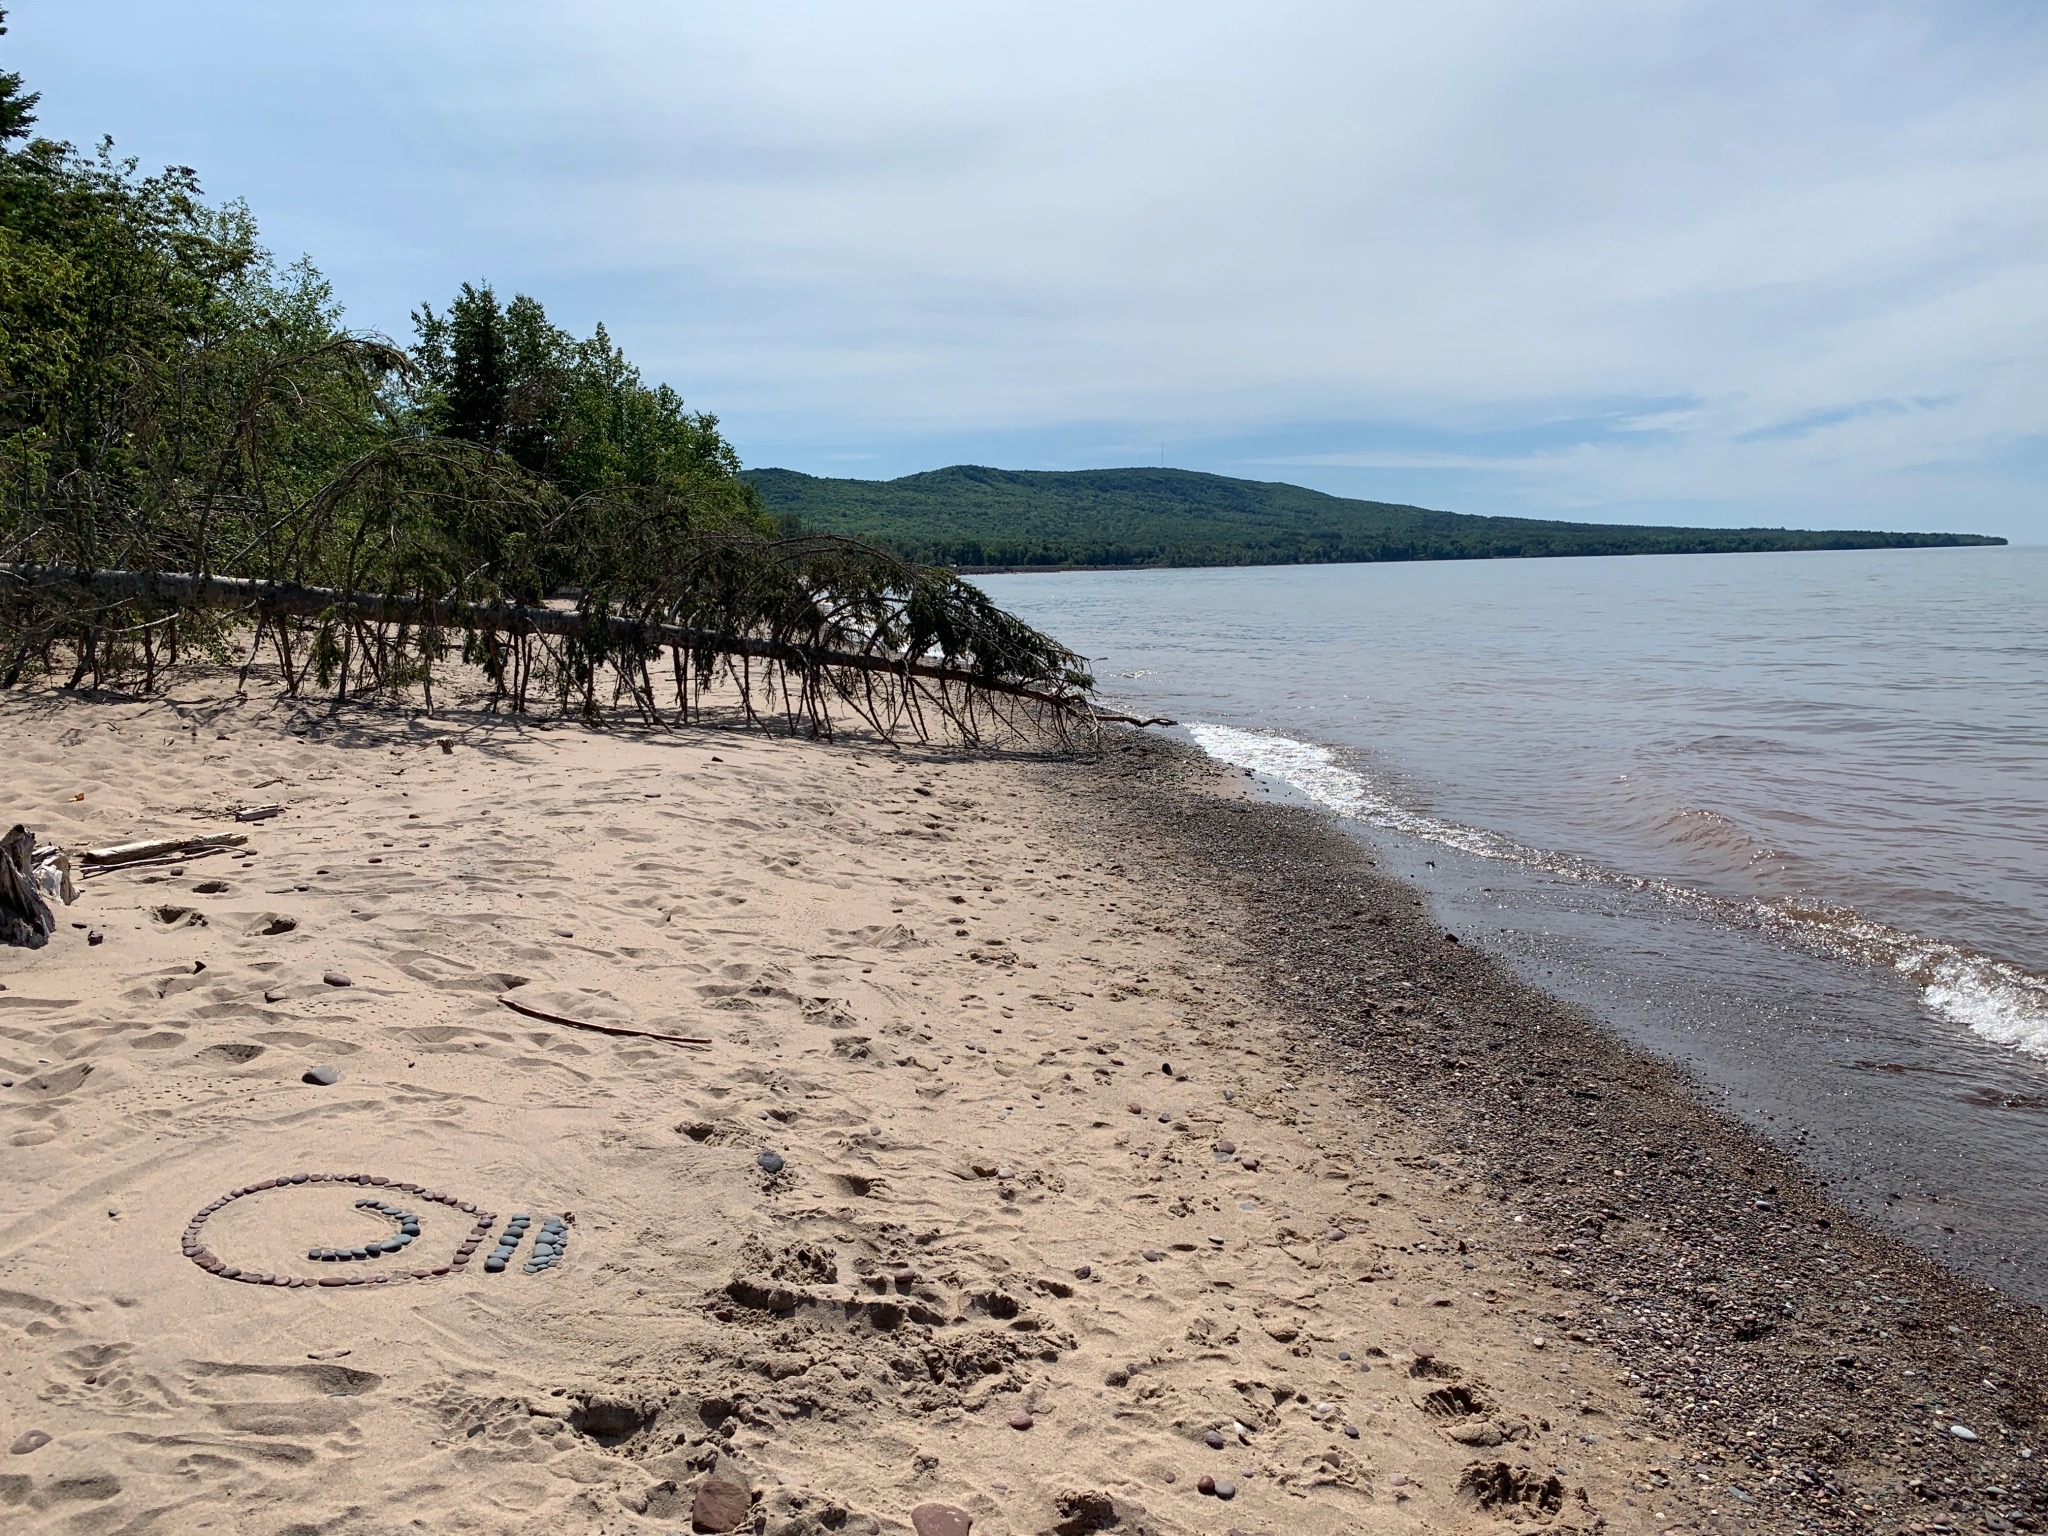 A photograph of a sandy beach along a lake shore. Someone drew the Light Can Help You logo in the sand.